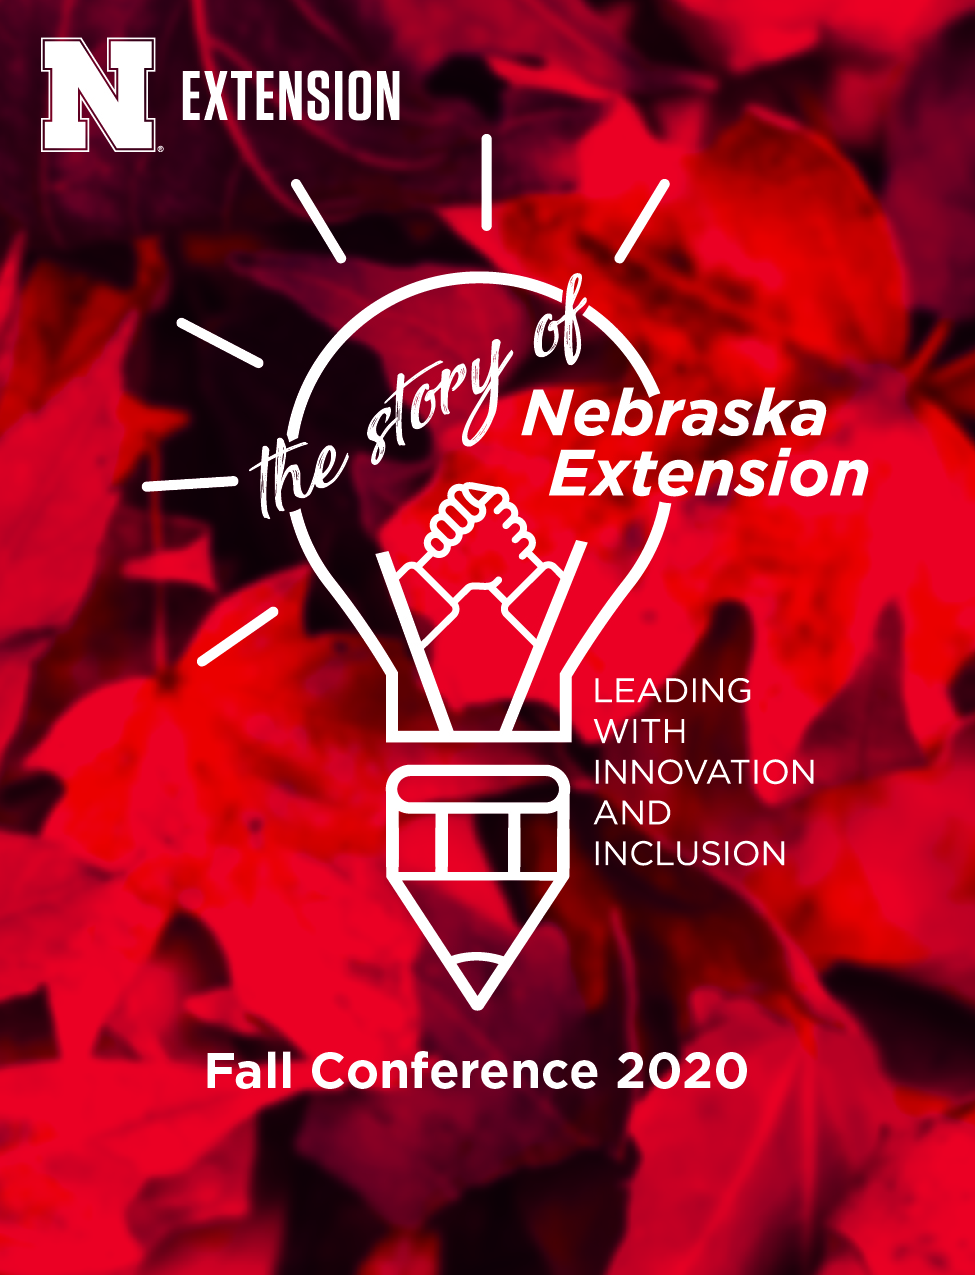 Fall Conference 2020